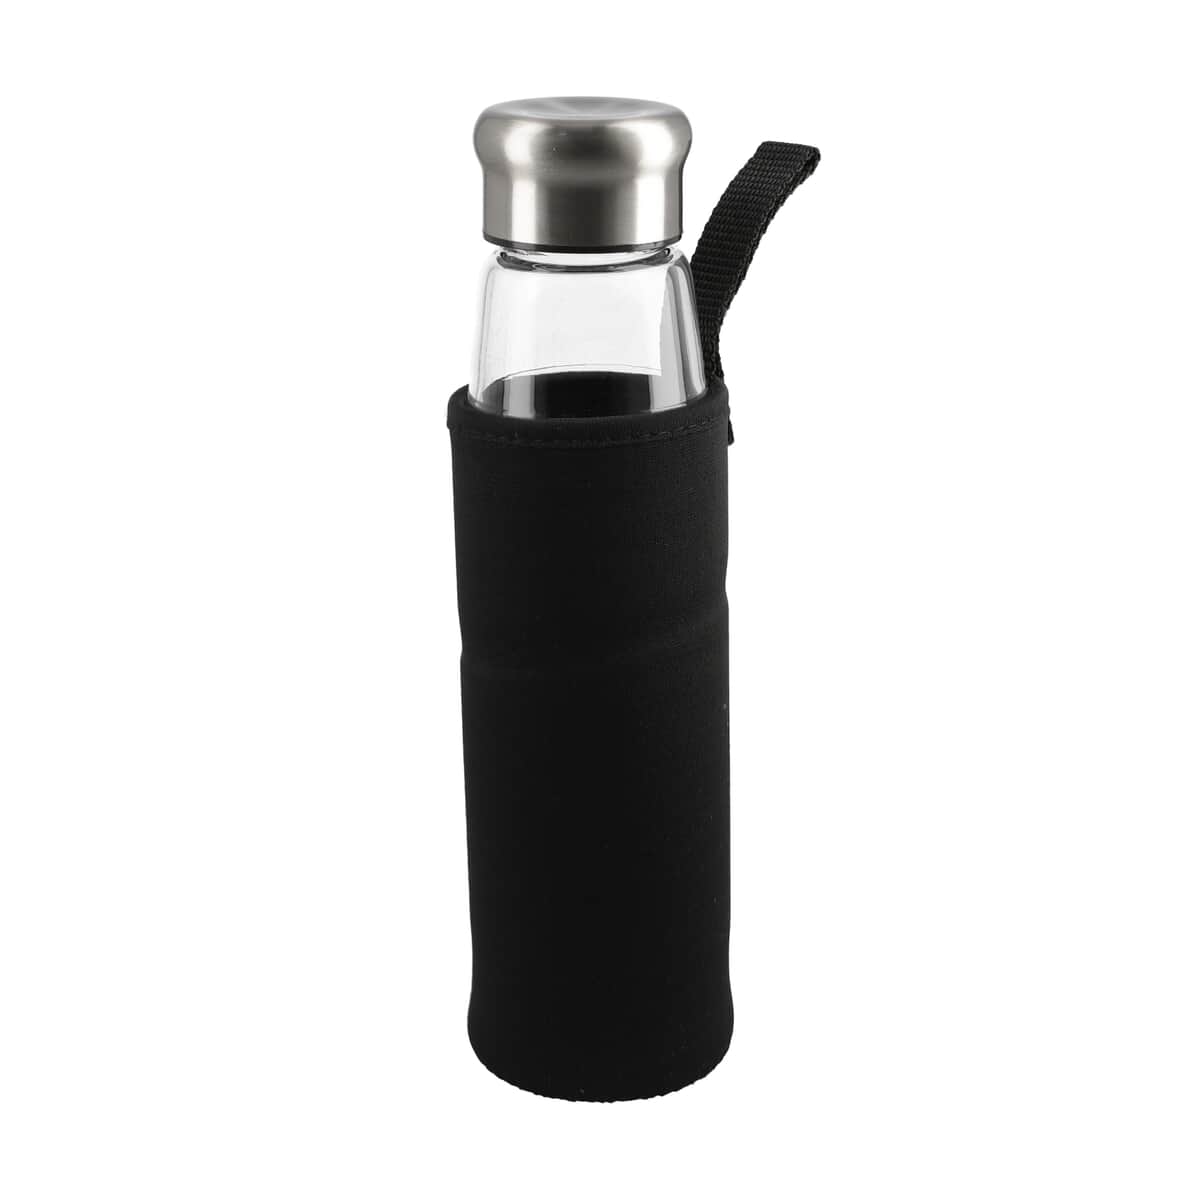 HOMESMART Silver Color Stainless Steel and Glass Elite Shungite Filter Infuser Water Bottle with Black Insulated Carrier Cover 18.5oz image number 0